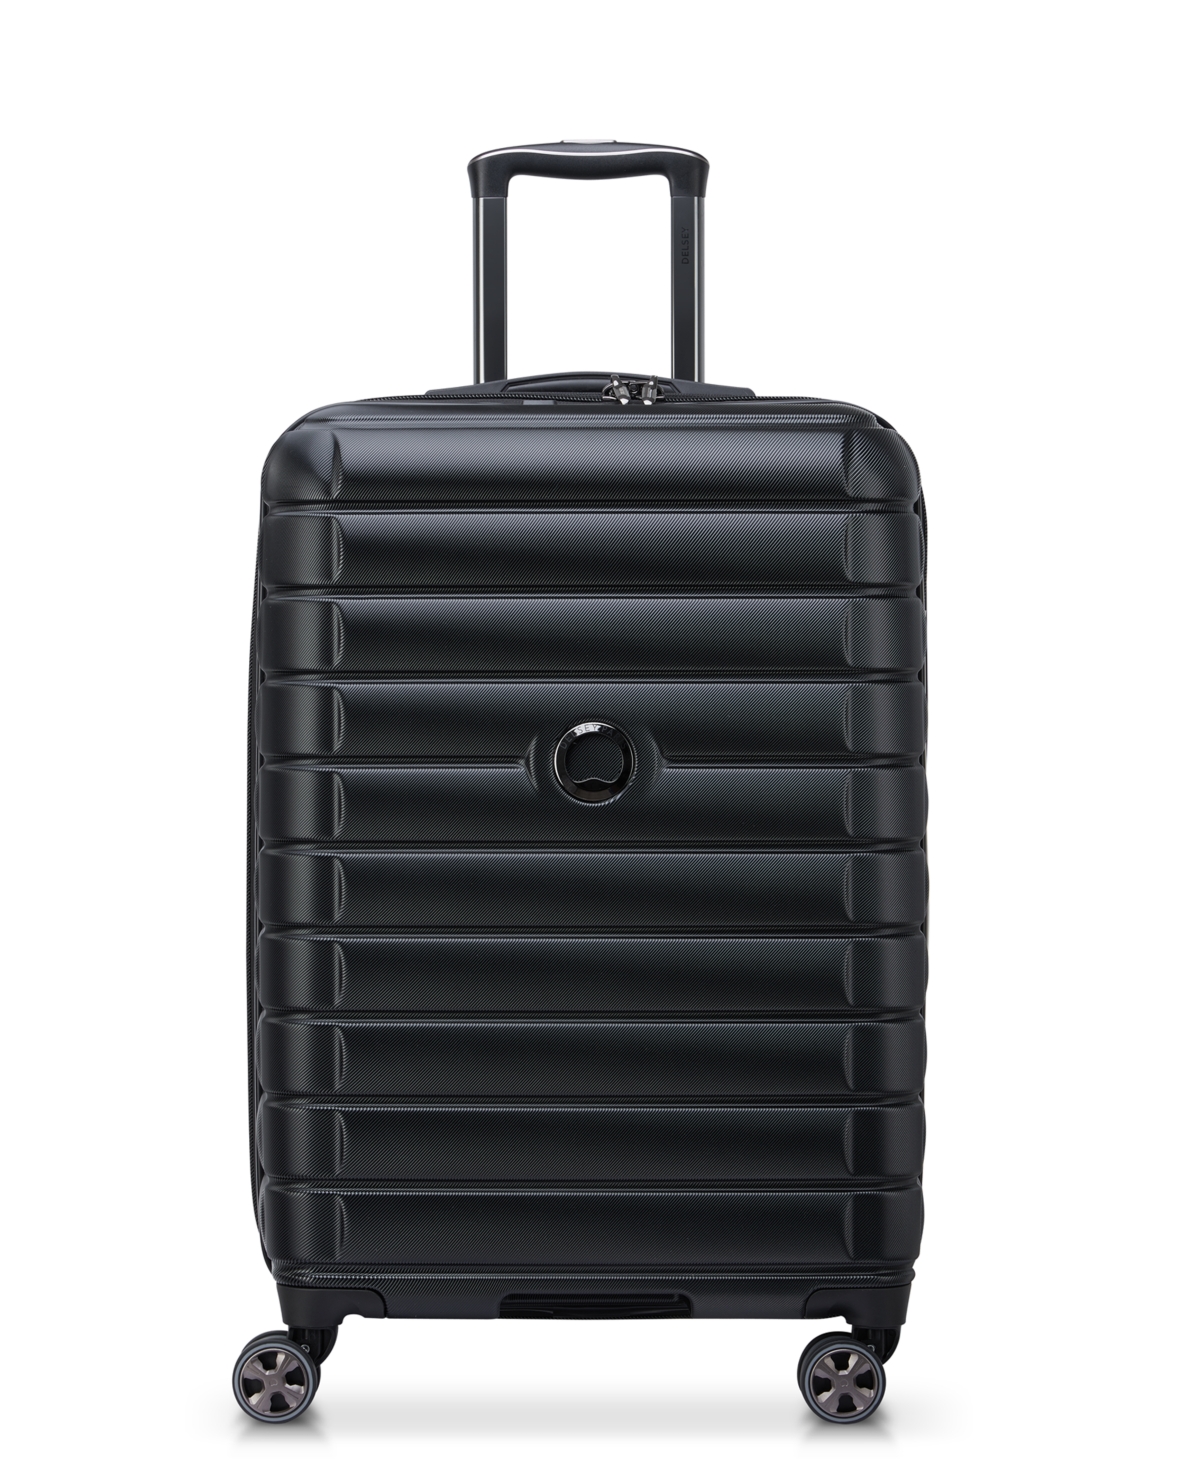 Shadow 5.0 Expandable 24" Check-in Spinner Luggage - Black